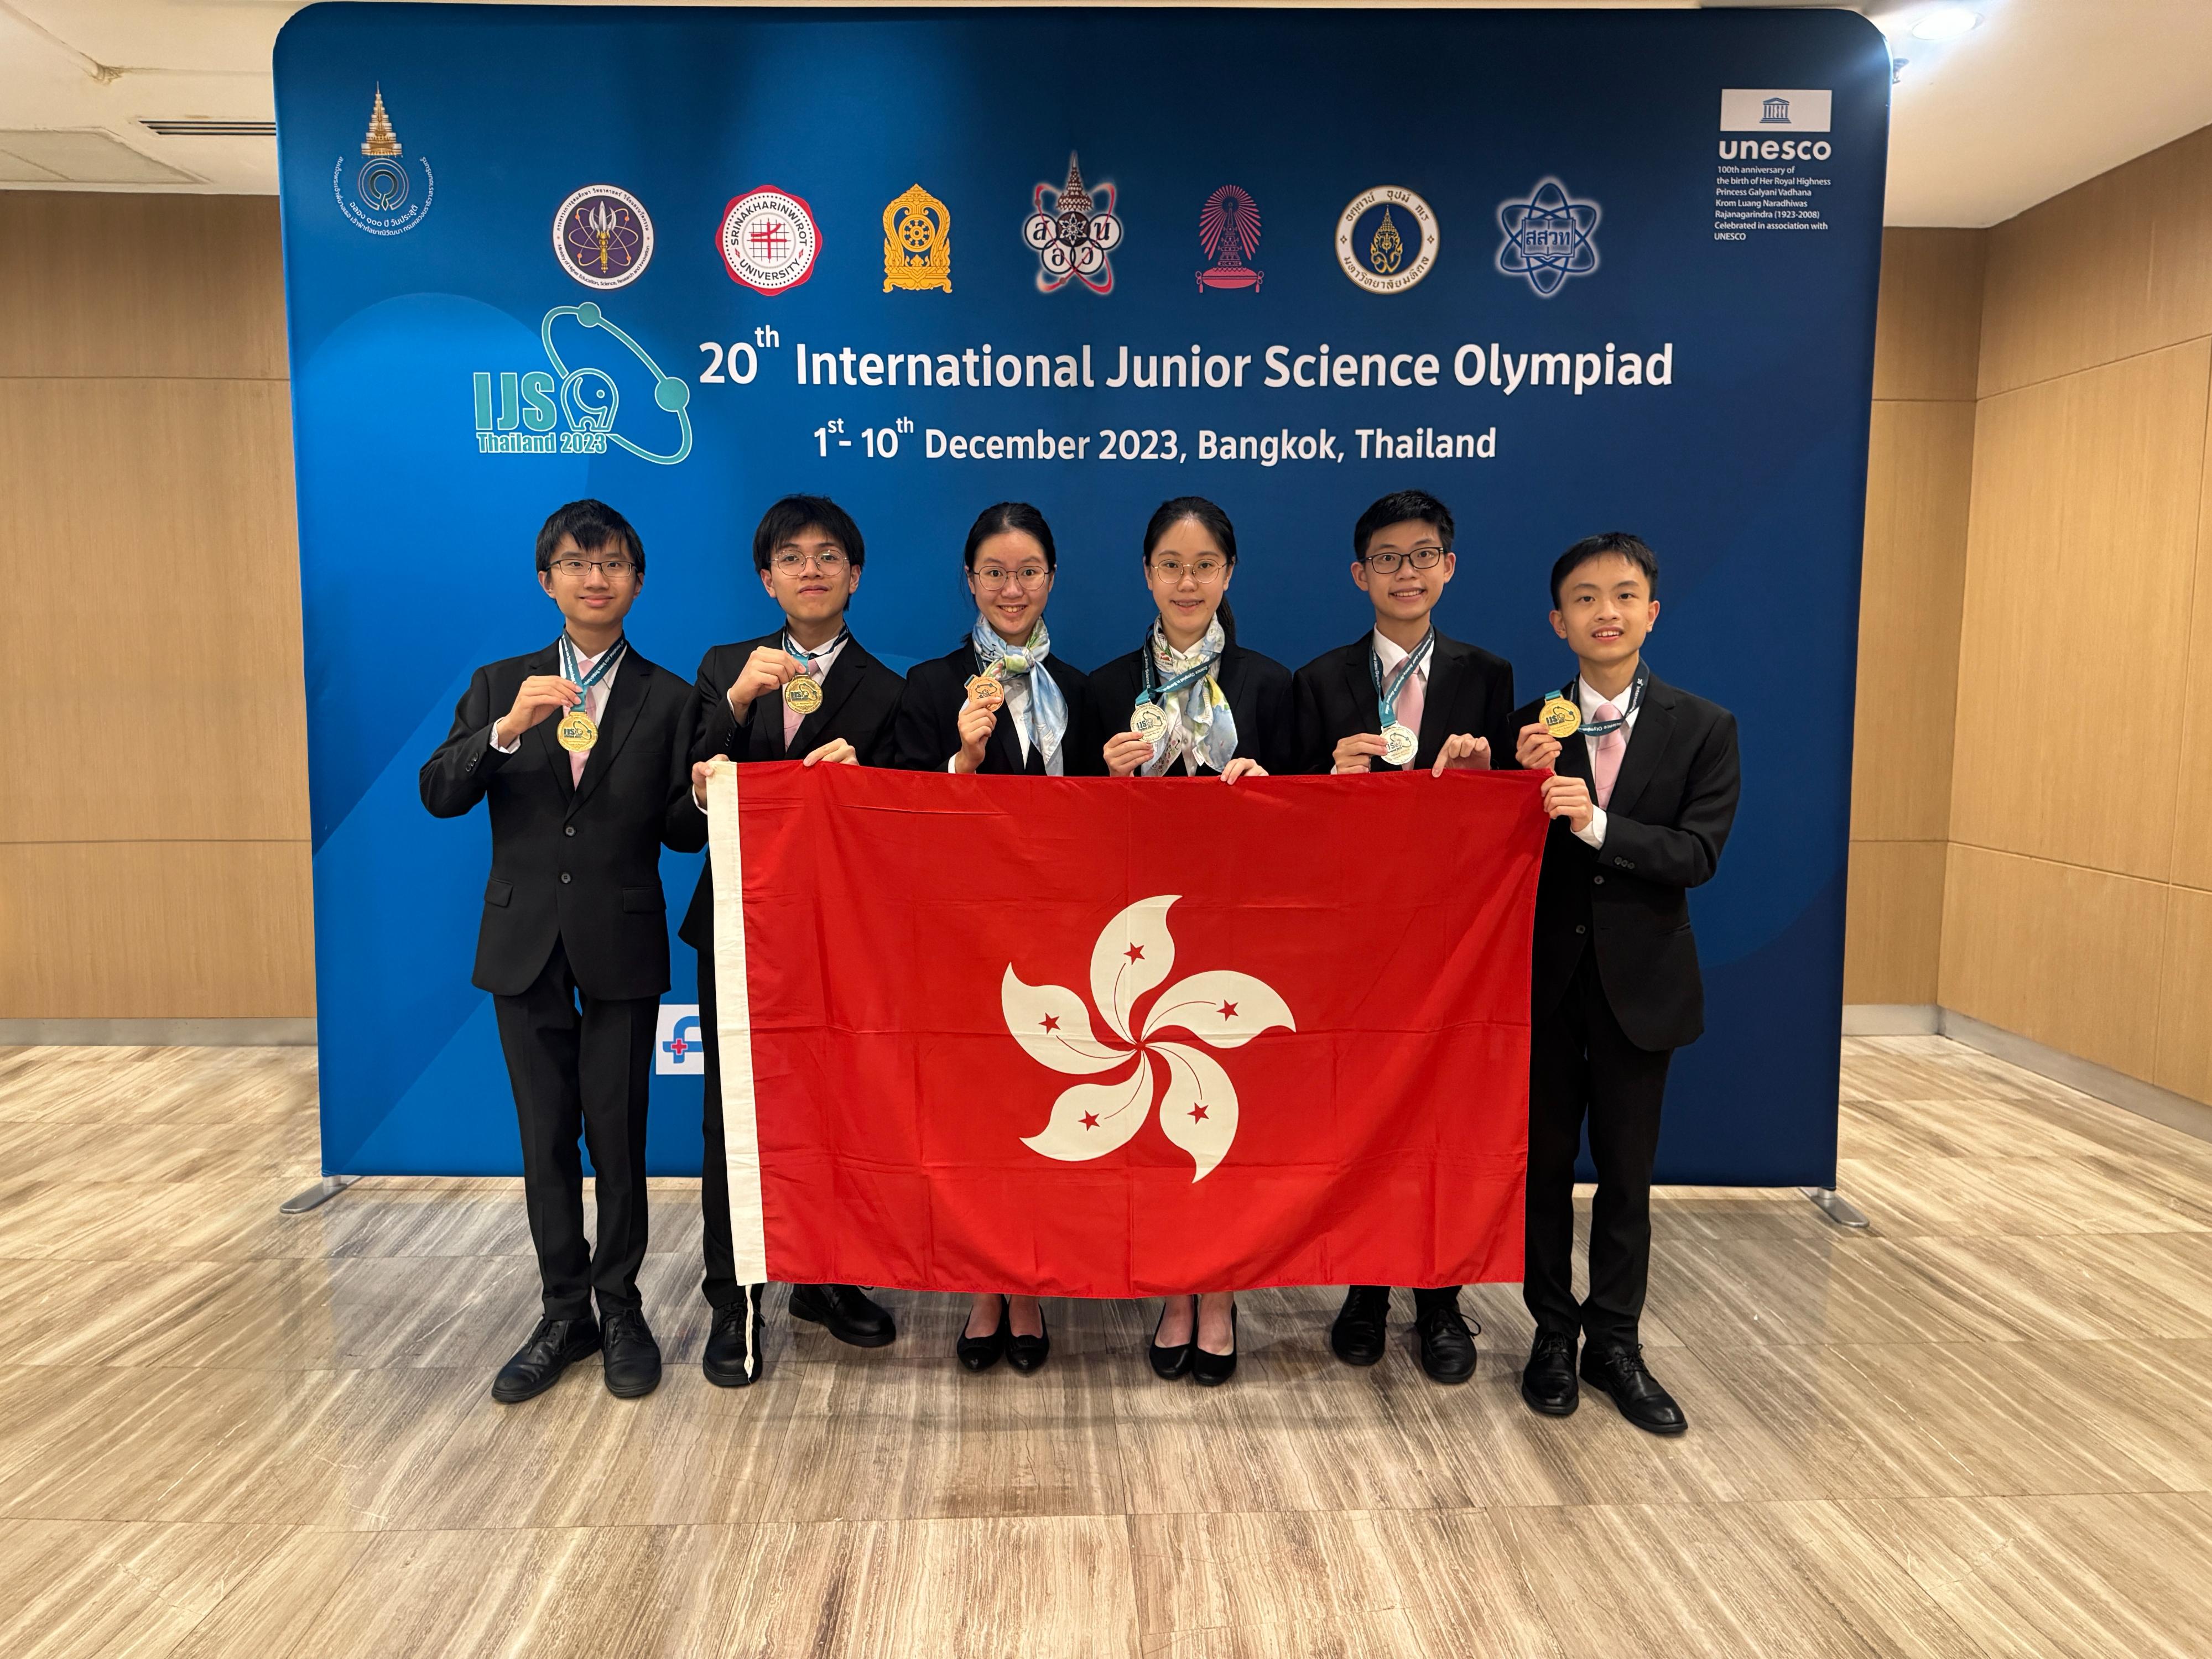 Six students representing Hong Kong achieved excellent results in the 20th International Junior Science Olympiad, which was held in Thailand from December 1 to 10. They are (from left) Jayden Kong, Lai Yat-long, Joycelyn Sun, Inna Belle Lee, Marcus Tsang and Sung Tsz-ngo.
